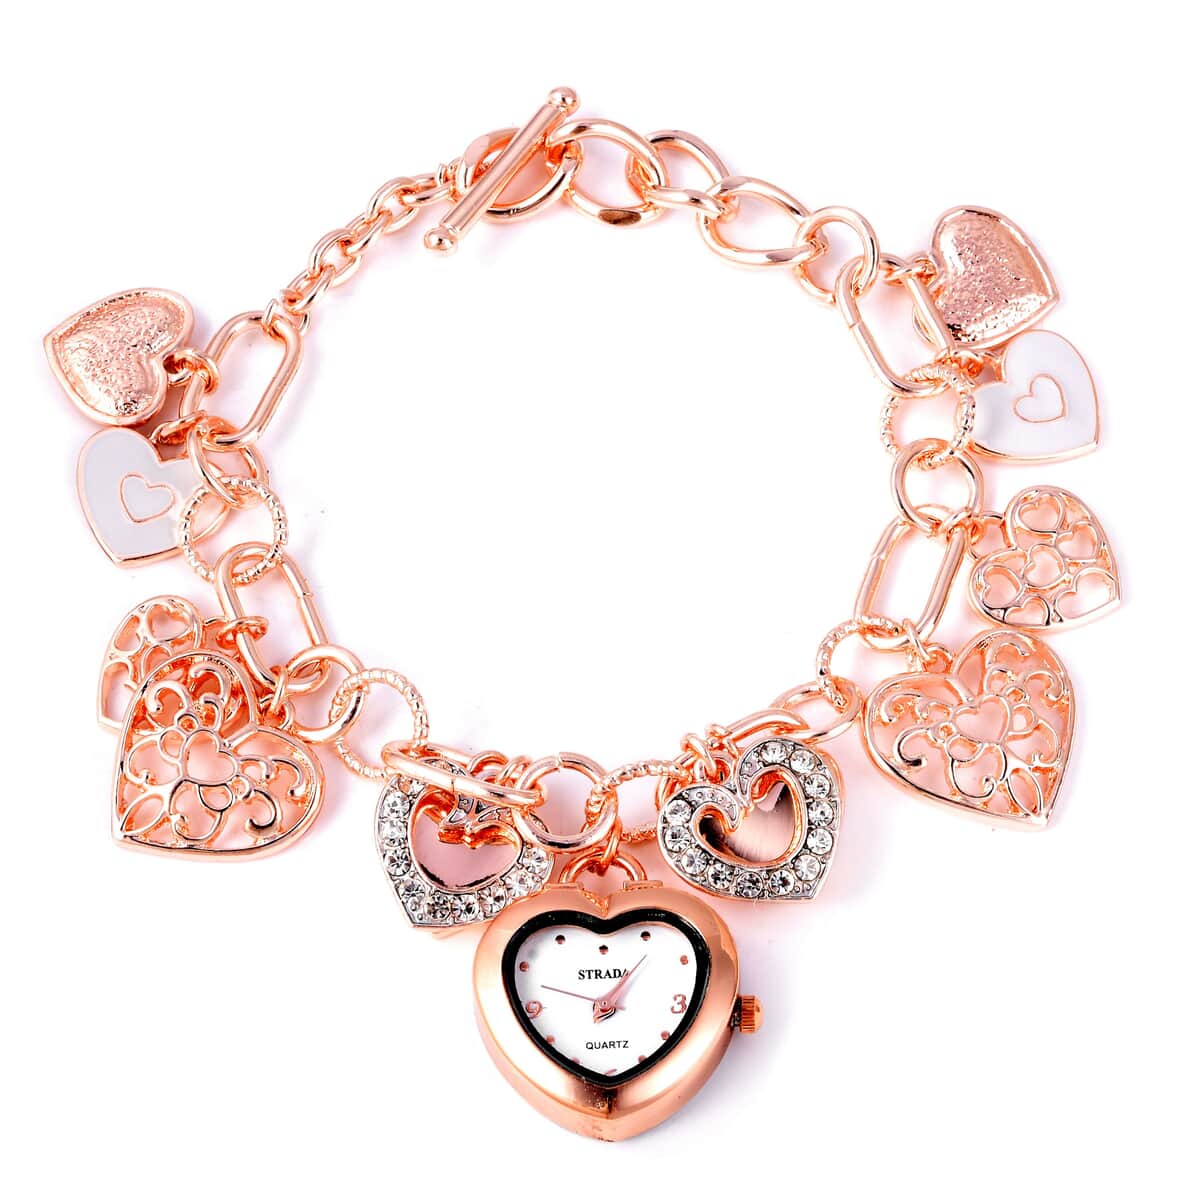 Strada White Austrian Crystal and Enameled Japanese Movement Charm Heart Bracelet Watch in Rosetone (7.5-9 in) image number 0